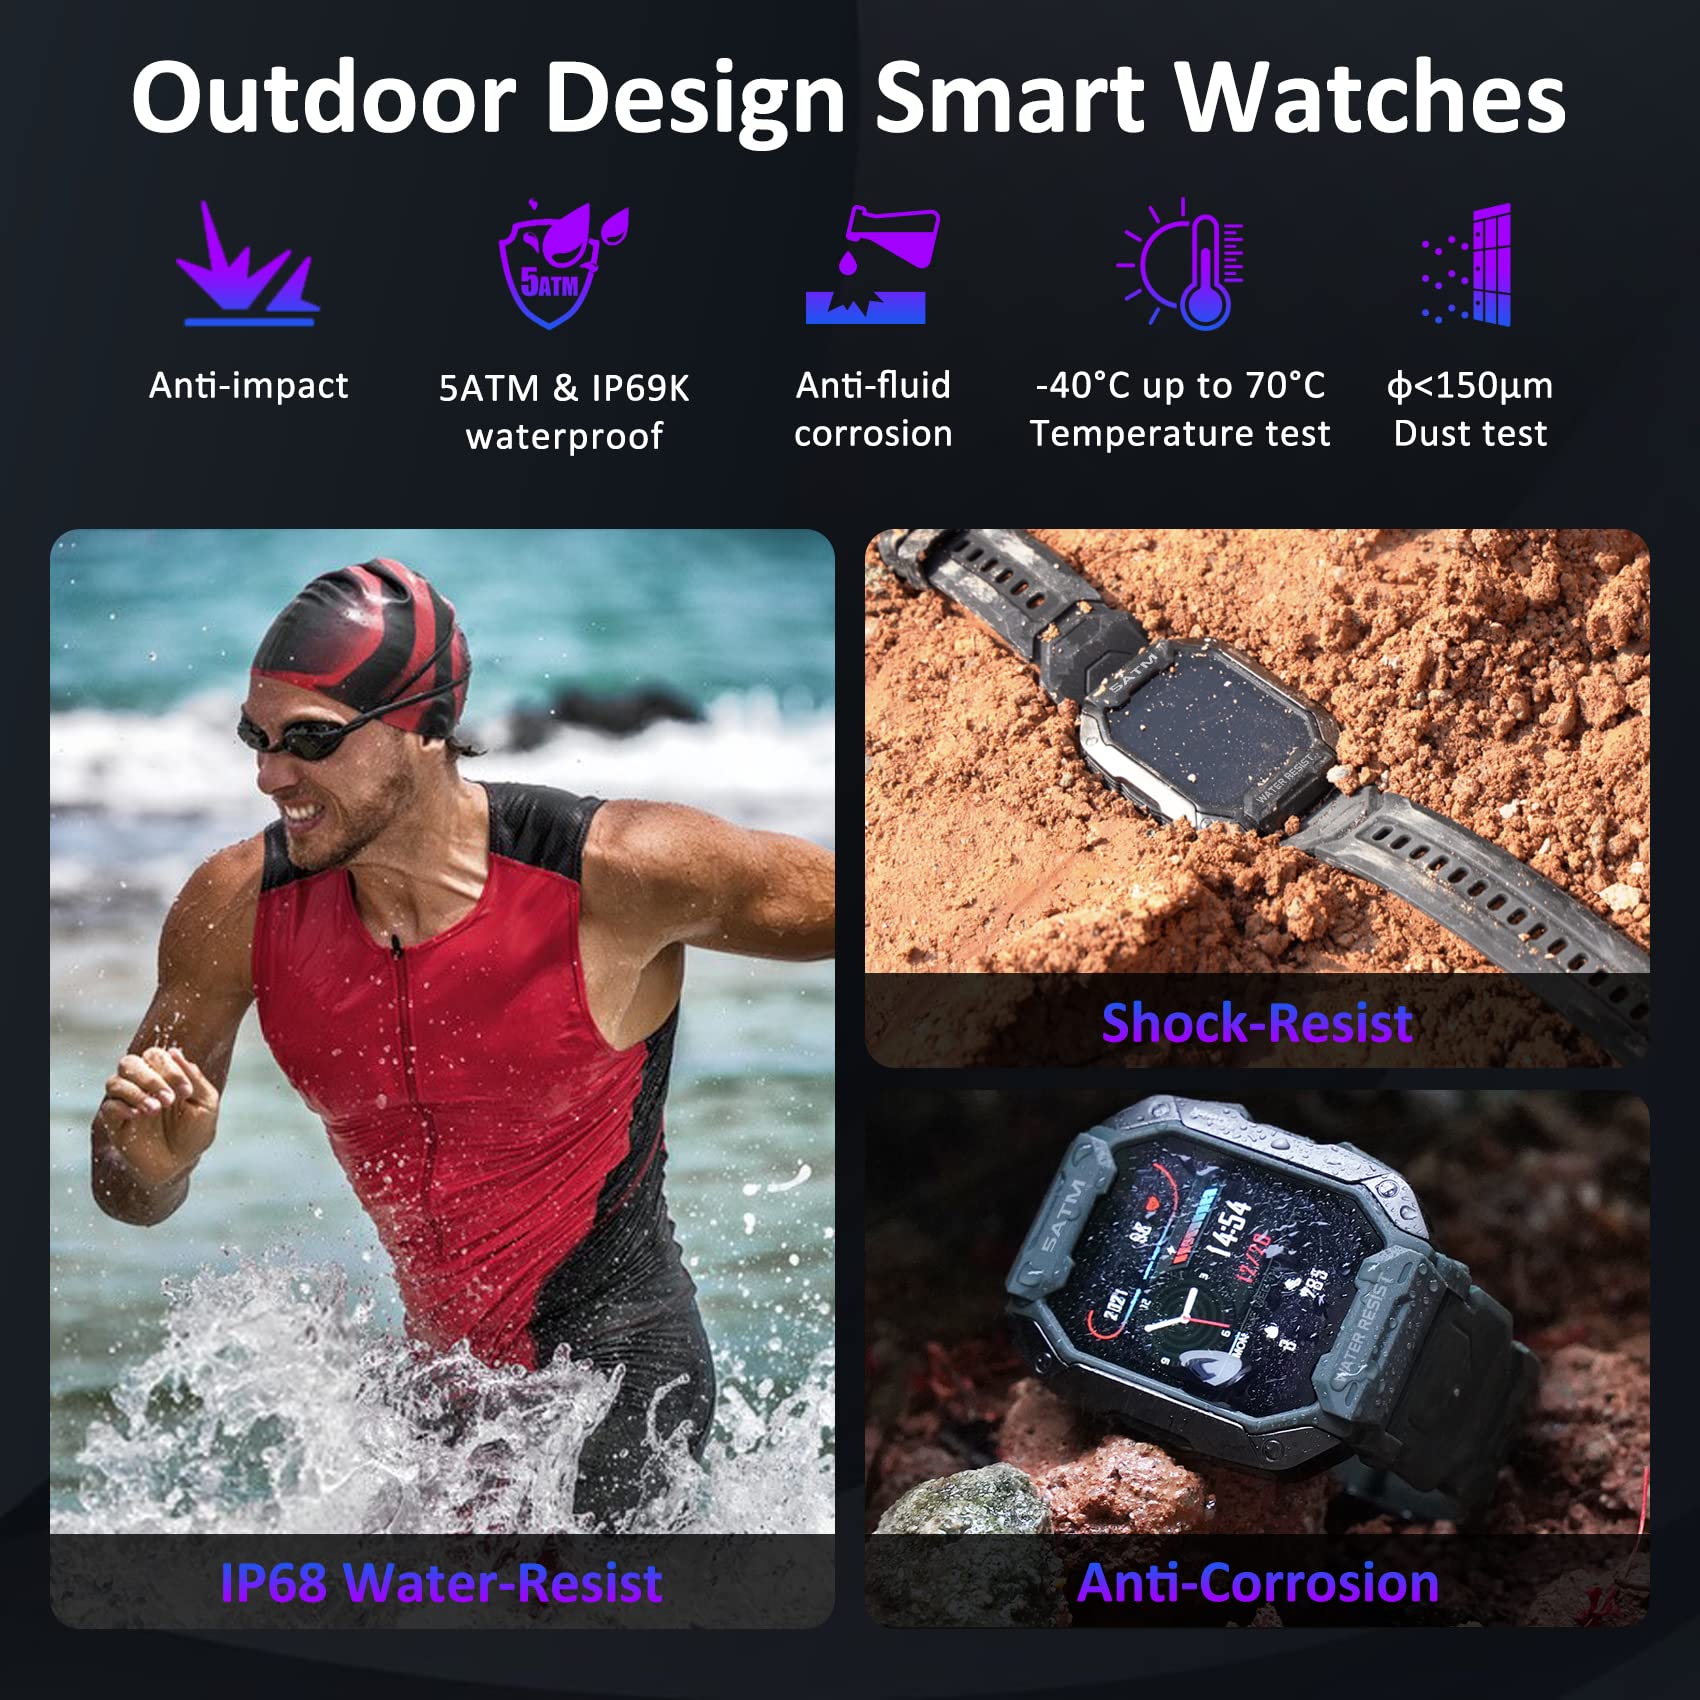 AMAZTIM Smart Watches for Men Women-5ATM/IP69K Waterproof Fitness Tracker for Android iPhones with Heart Rate Blood Pressure Monitor - 1.71''Tactical Military Sports (Black)